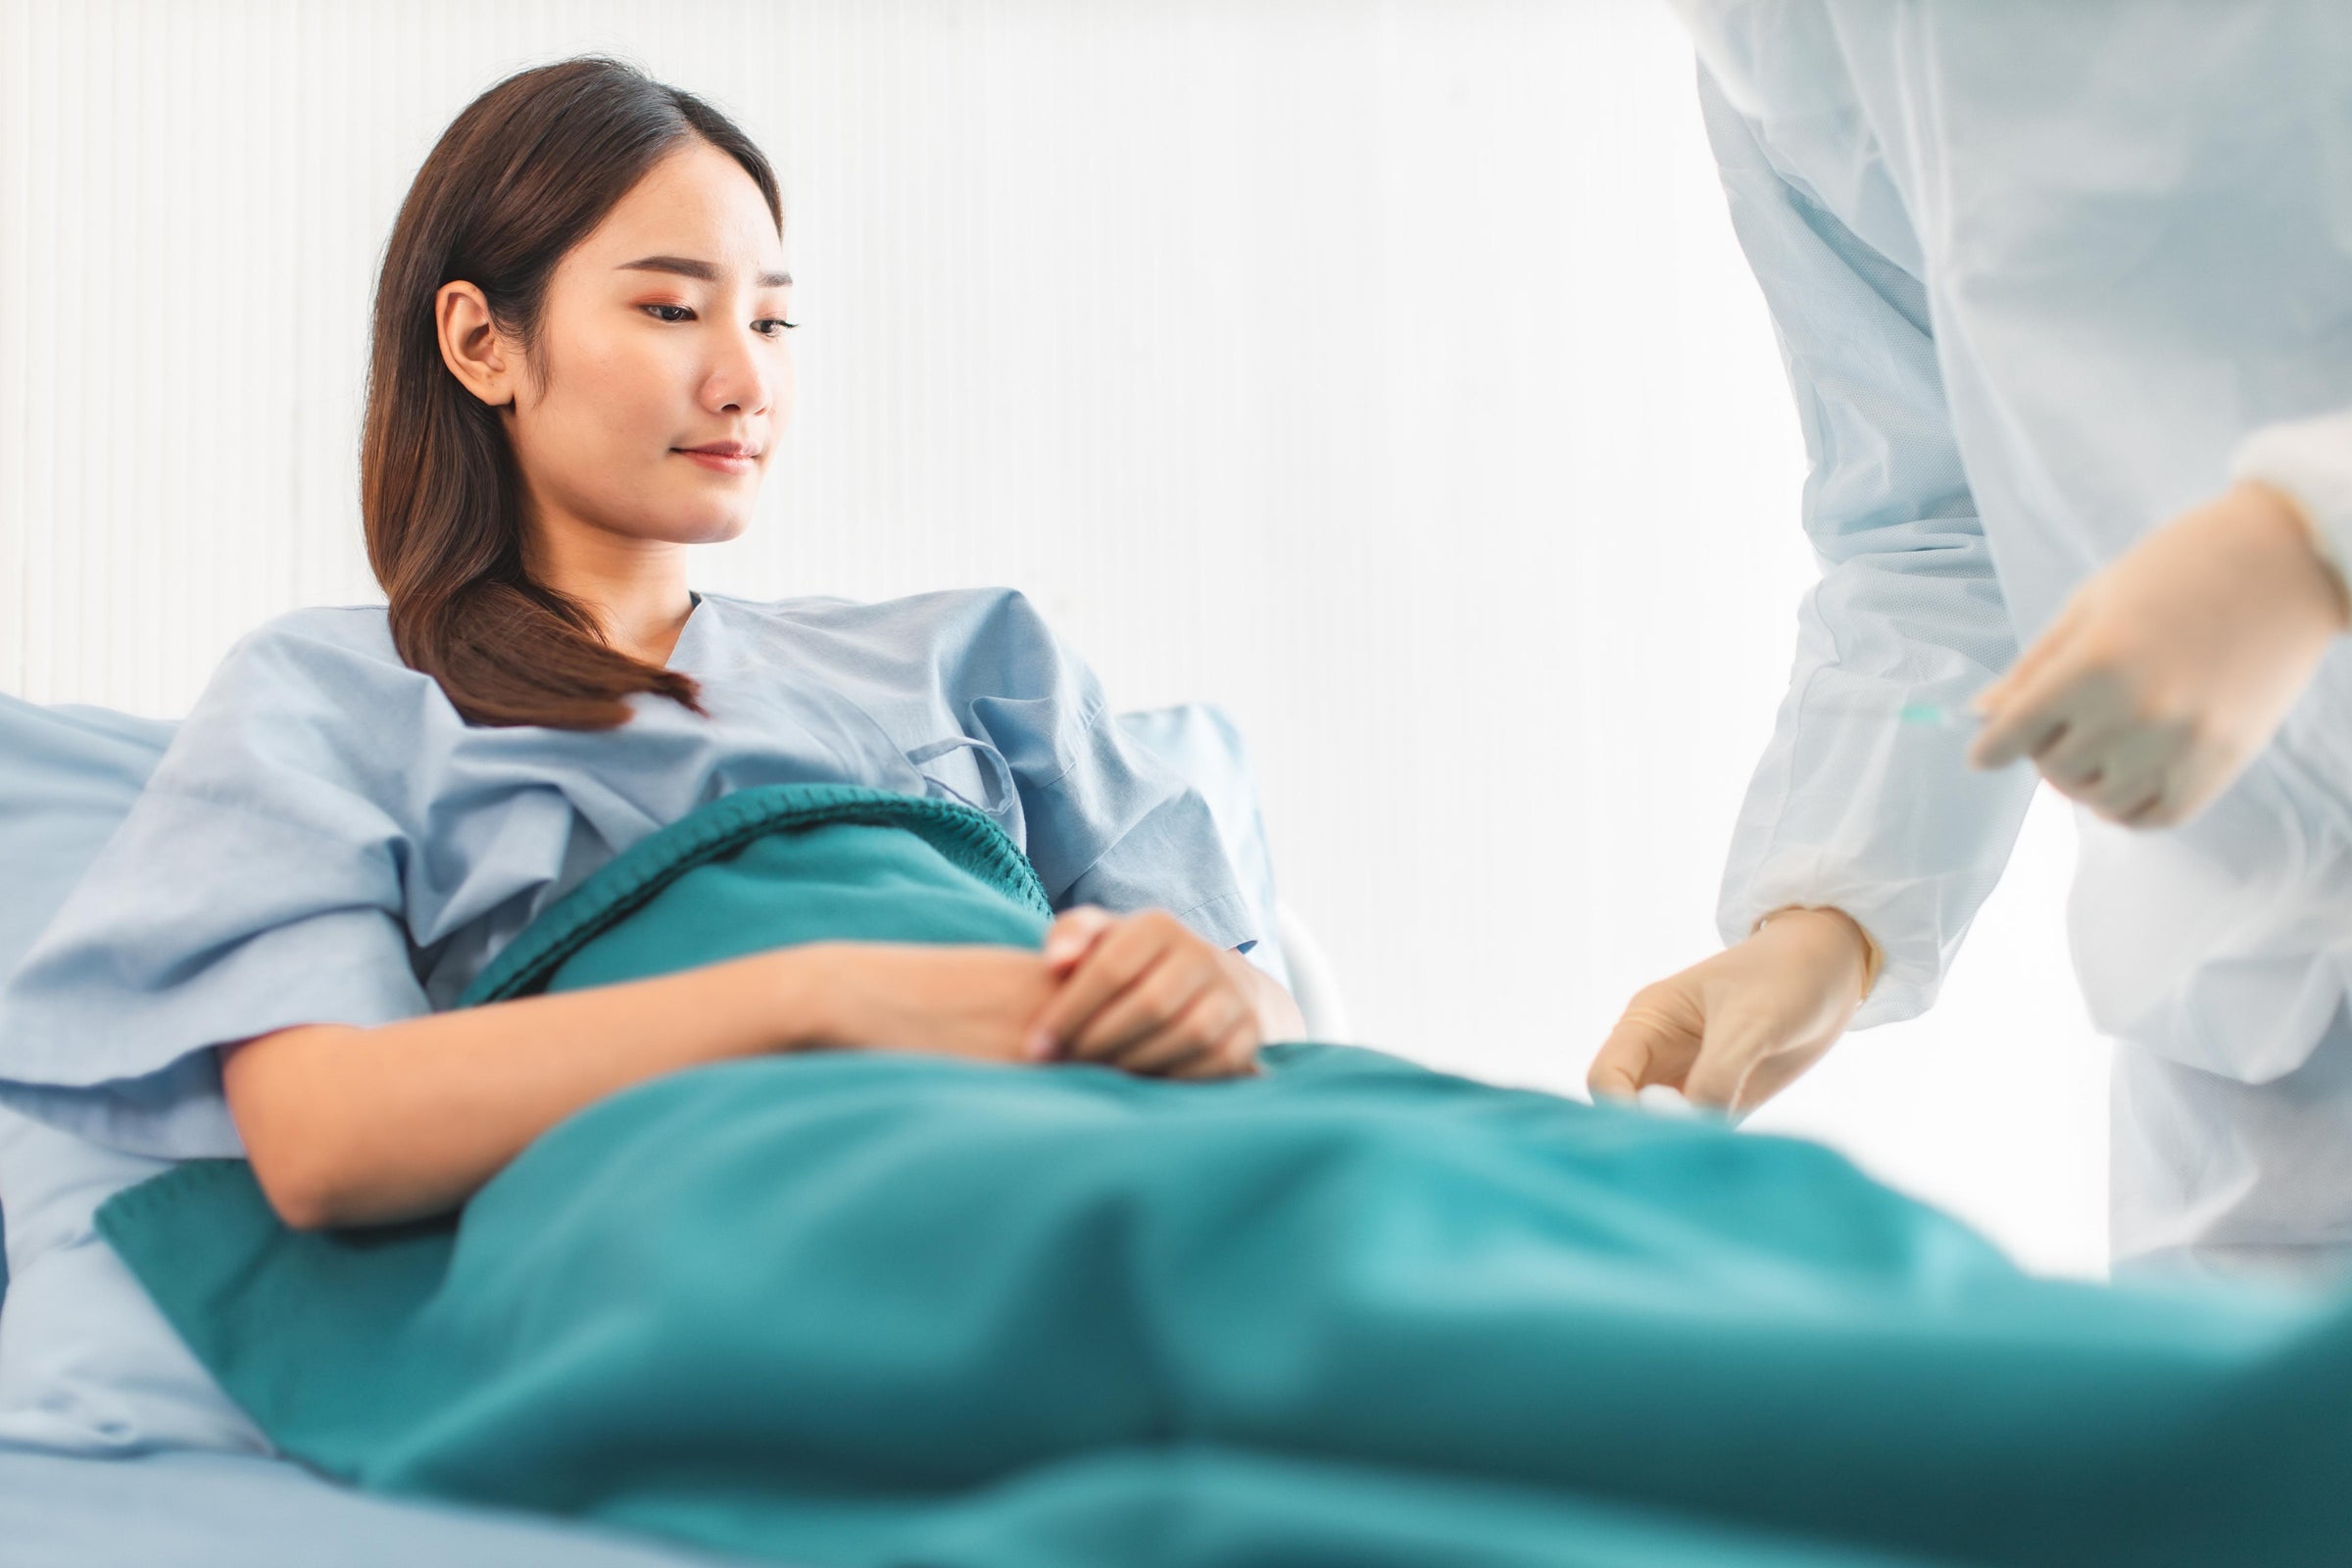 Nurse assisting a patient on hospital bed and educating her on how to prevent bed sores